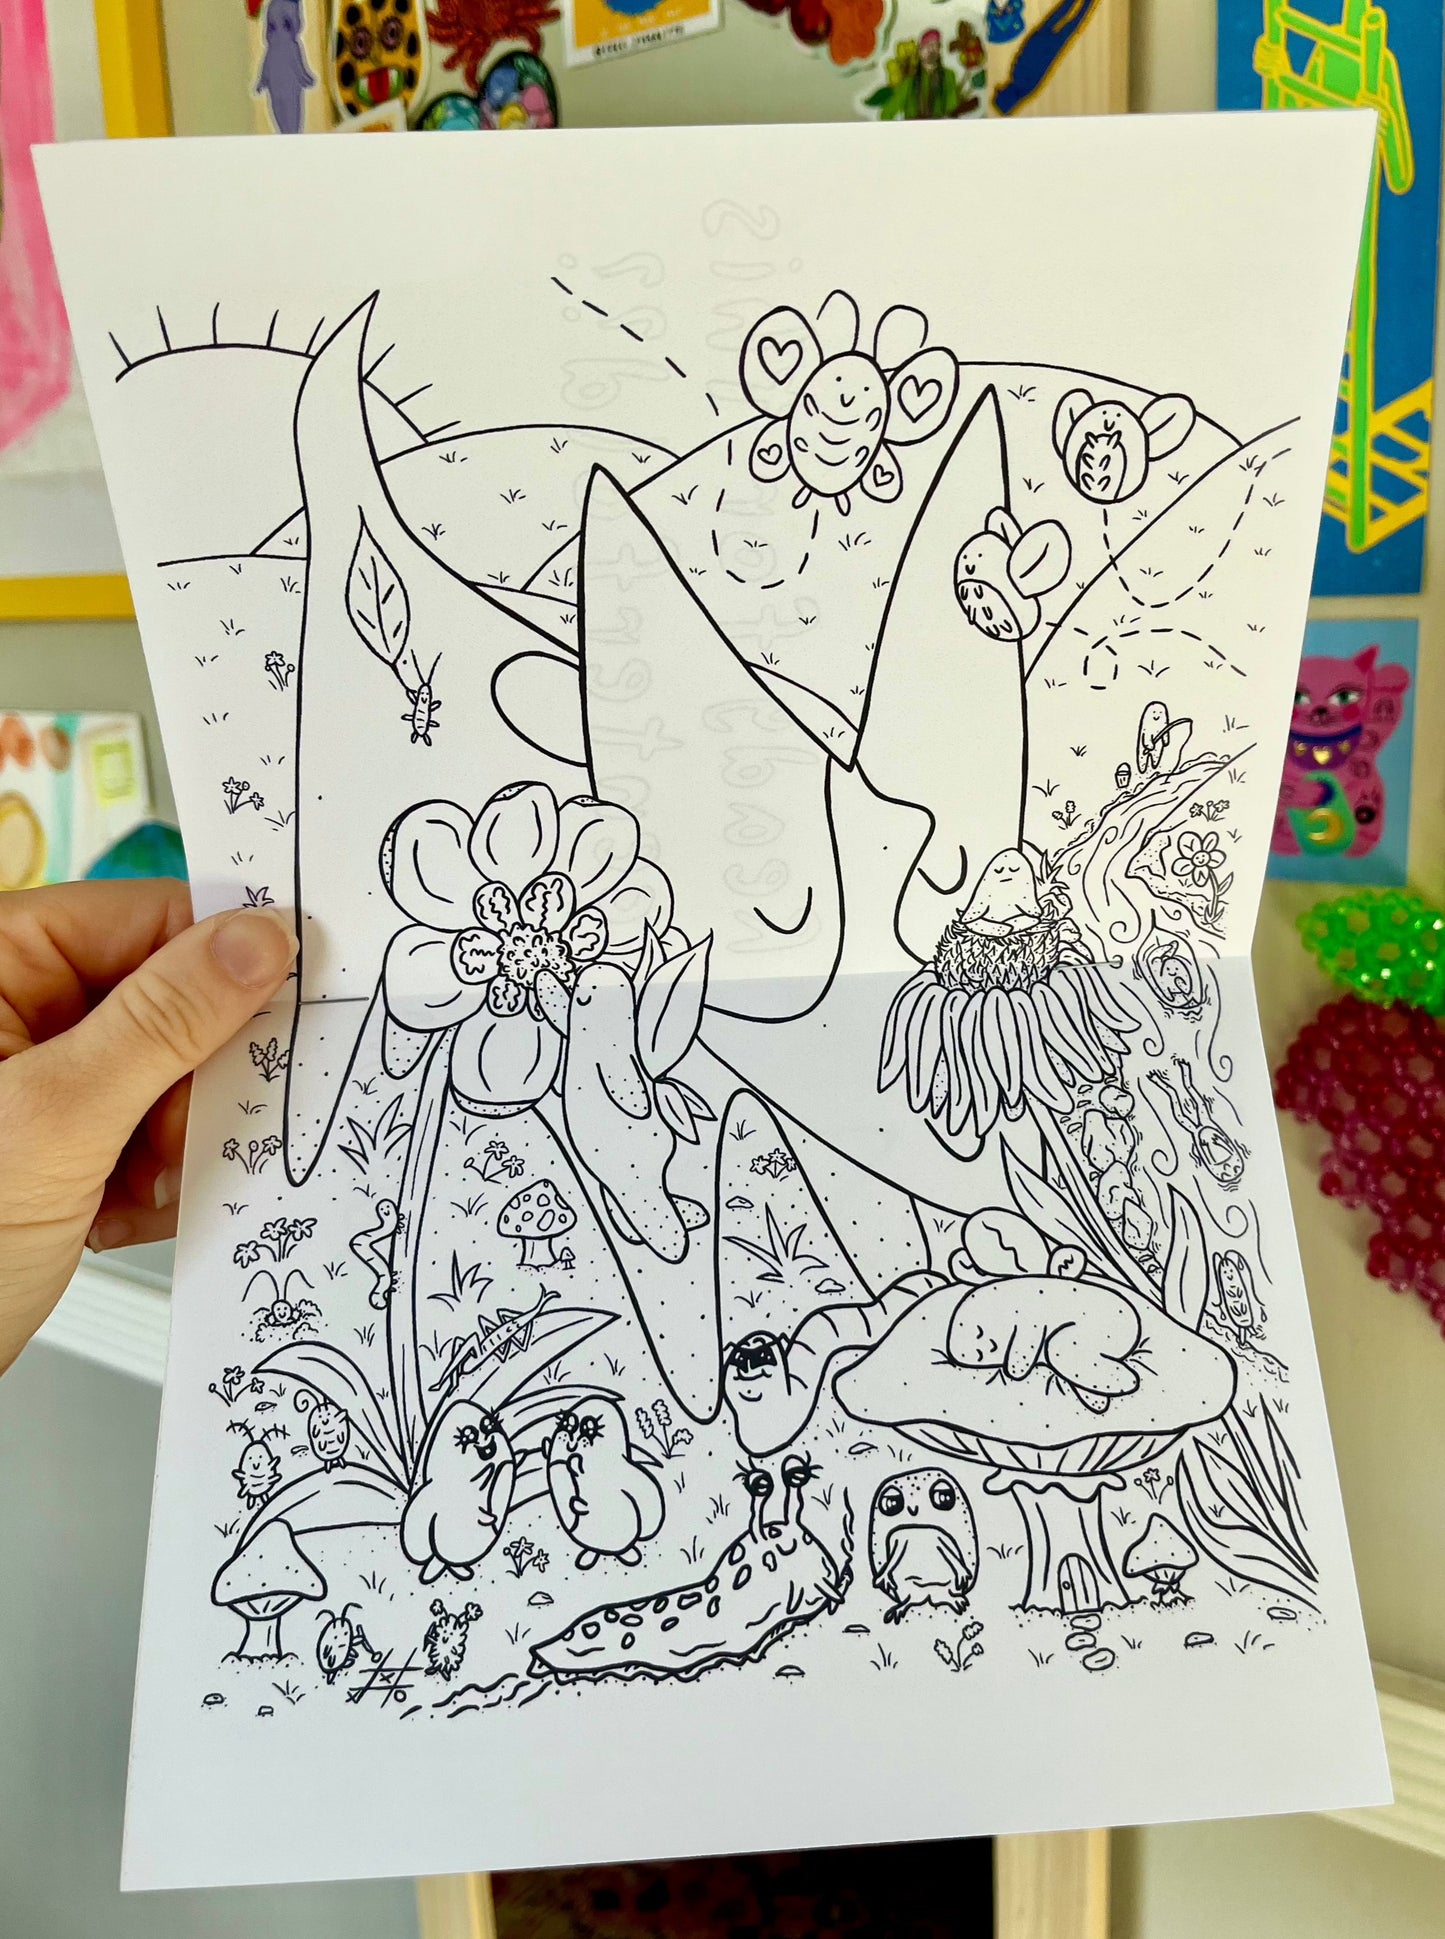 Tilly's Coloring Zine